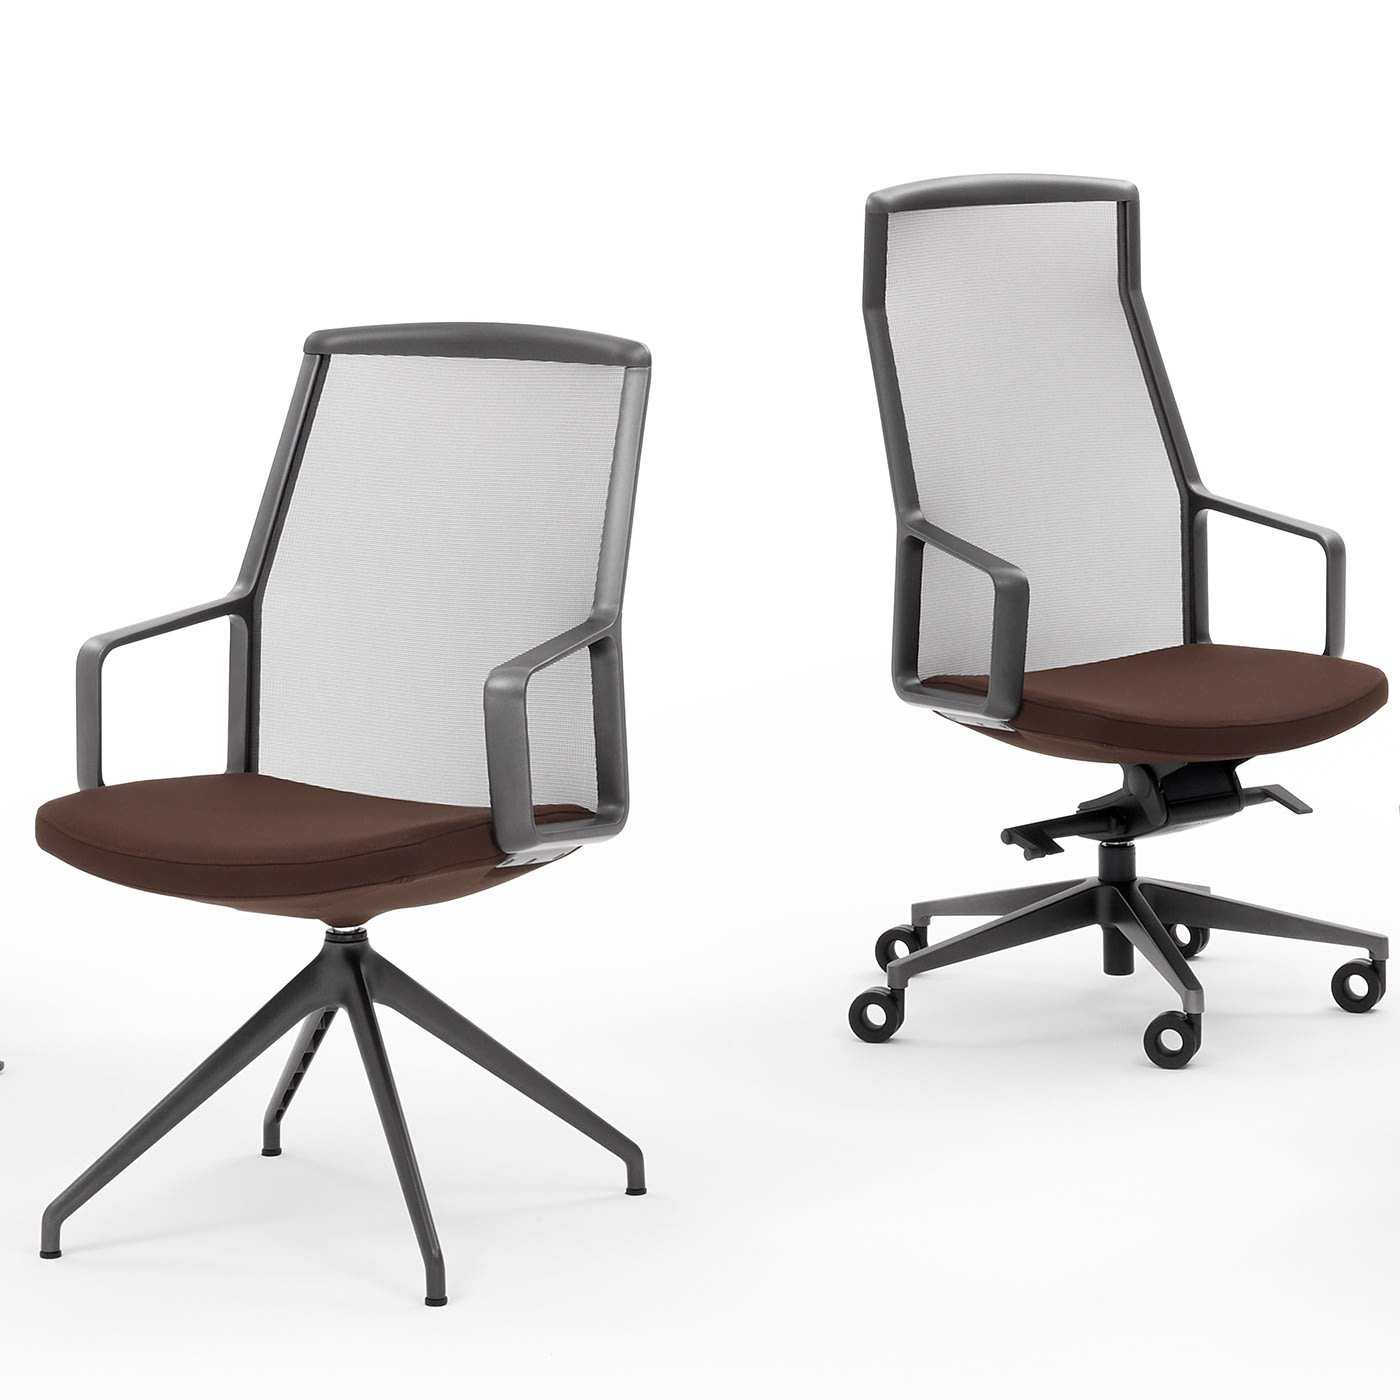 ADELE chestnut EXECUTIVE CHAIR by ORLANDINIDESIGN - Viganò & C.